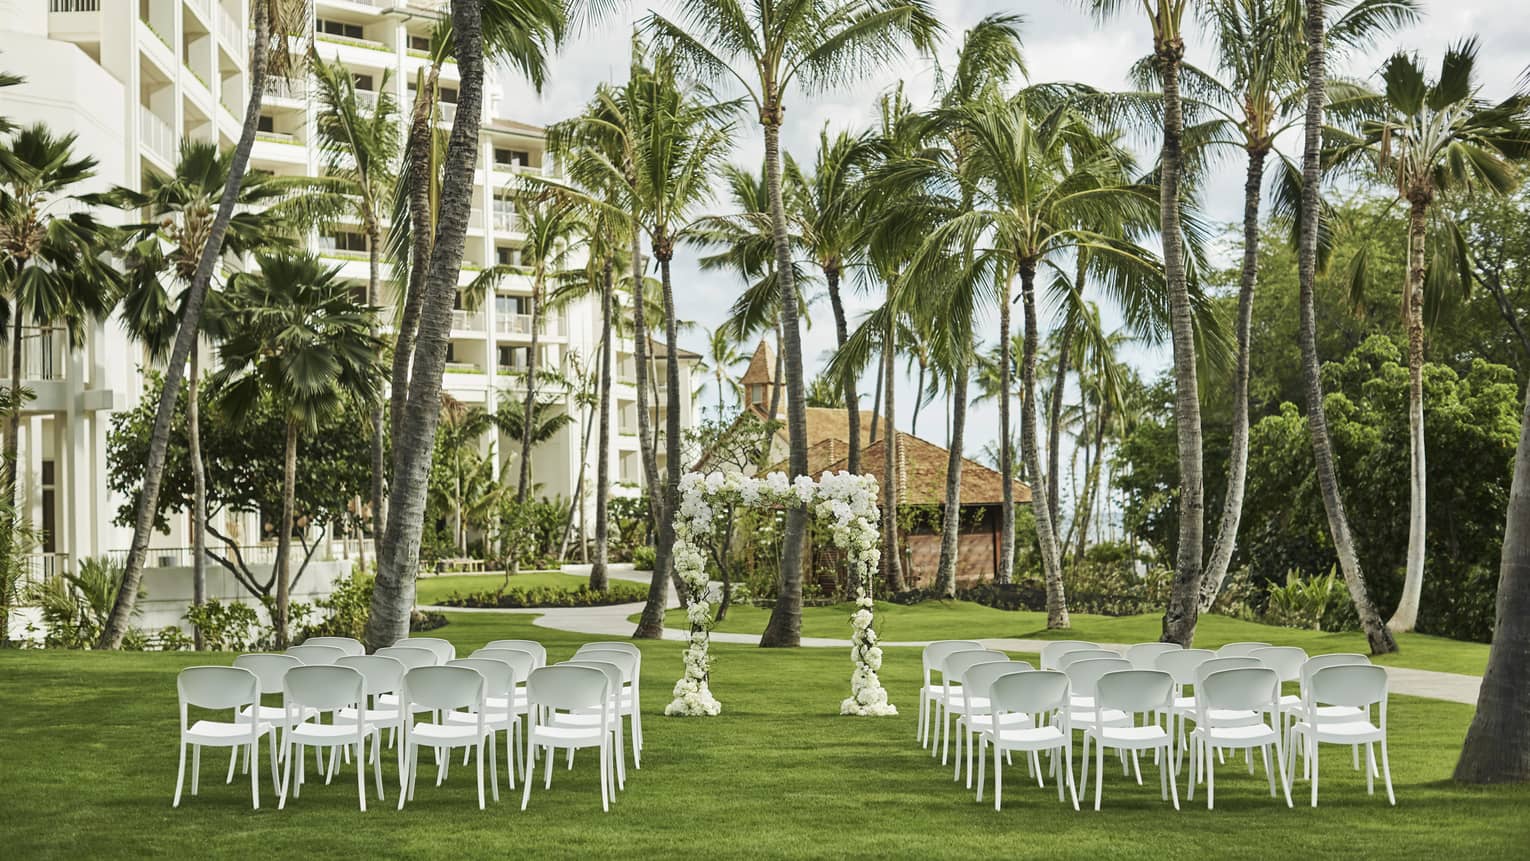 Outdoor wedding reception on event lawn, rows of white chairs face altar beneath palm trees